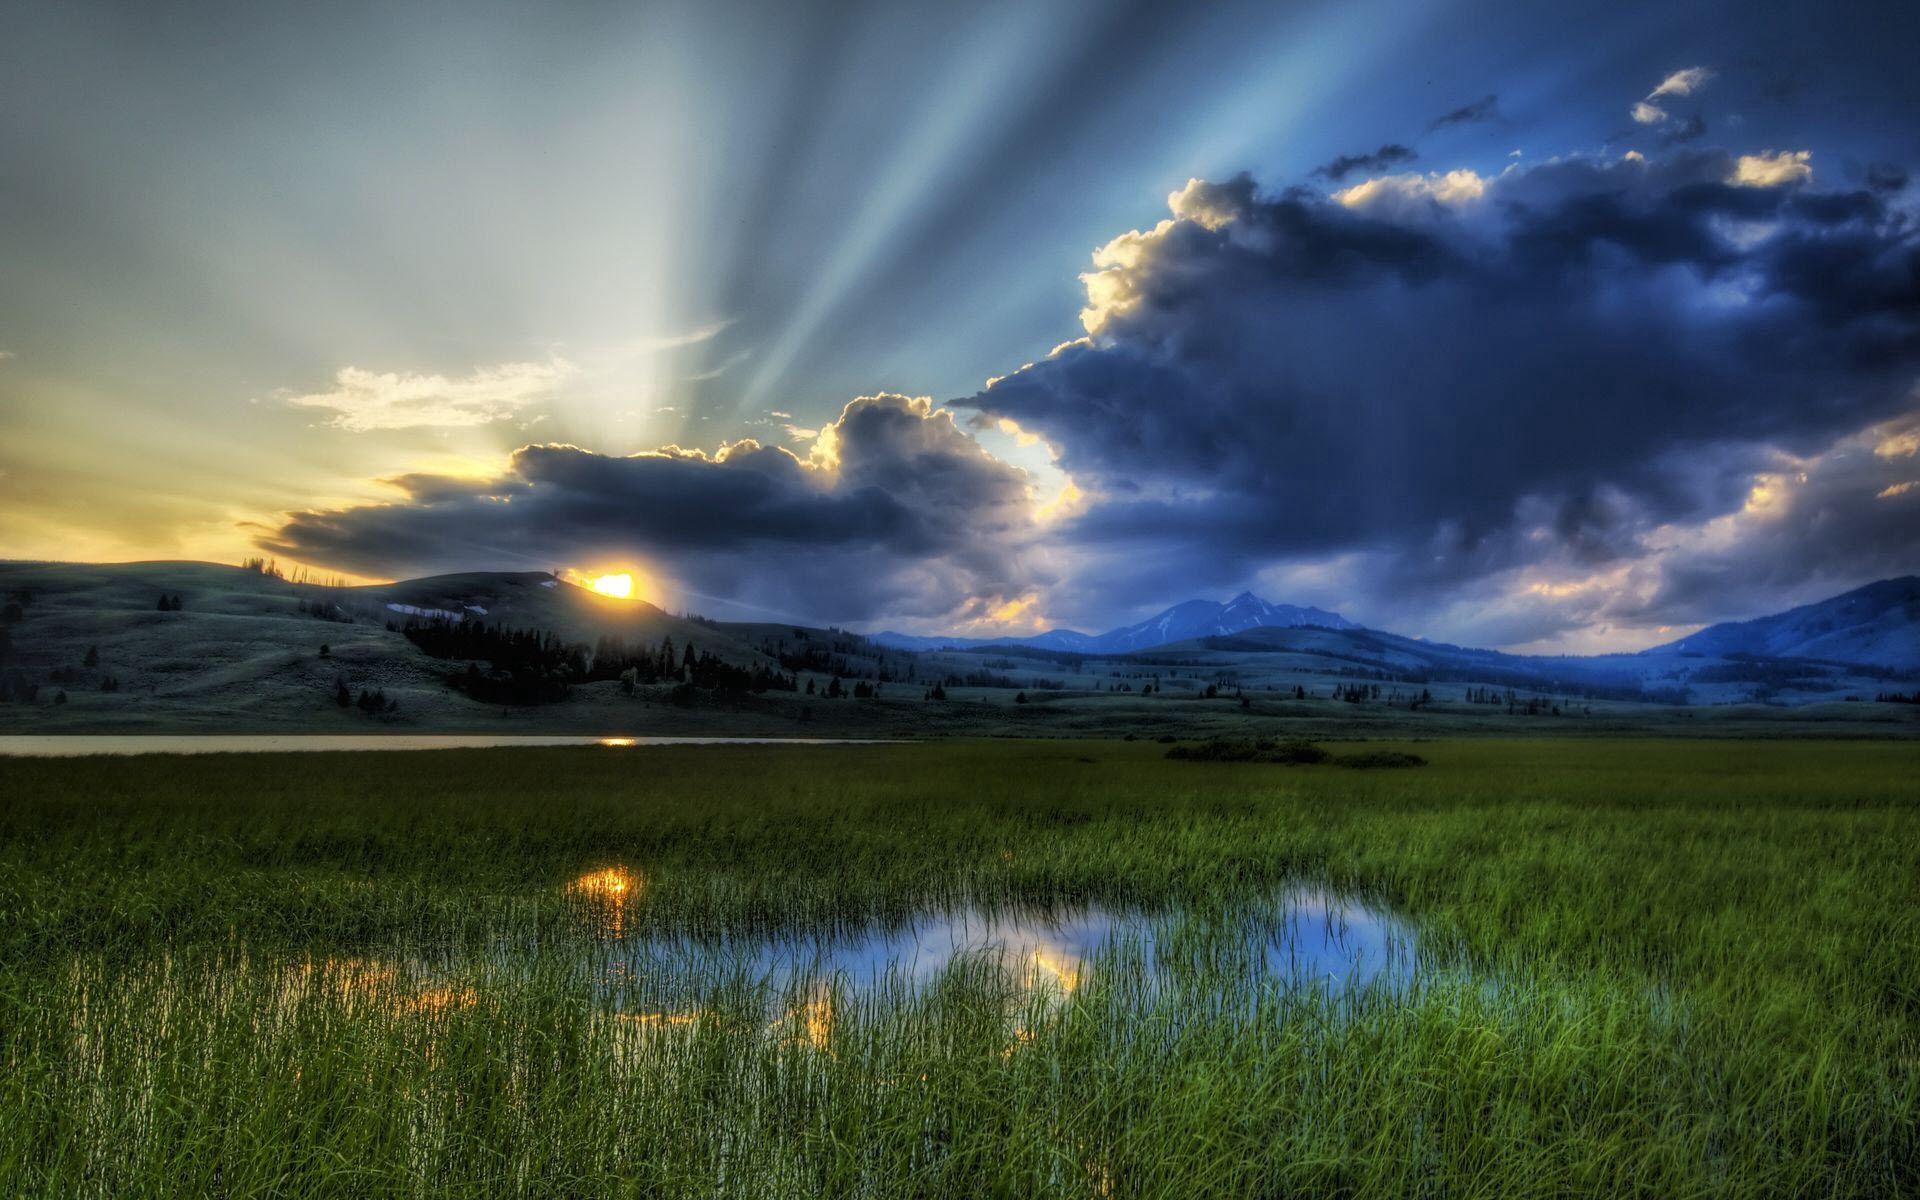 69576 download wallpaper nature, sky, mountains, sun, clouds, swamp, beams, rays, reeds screensavers and pictures for free